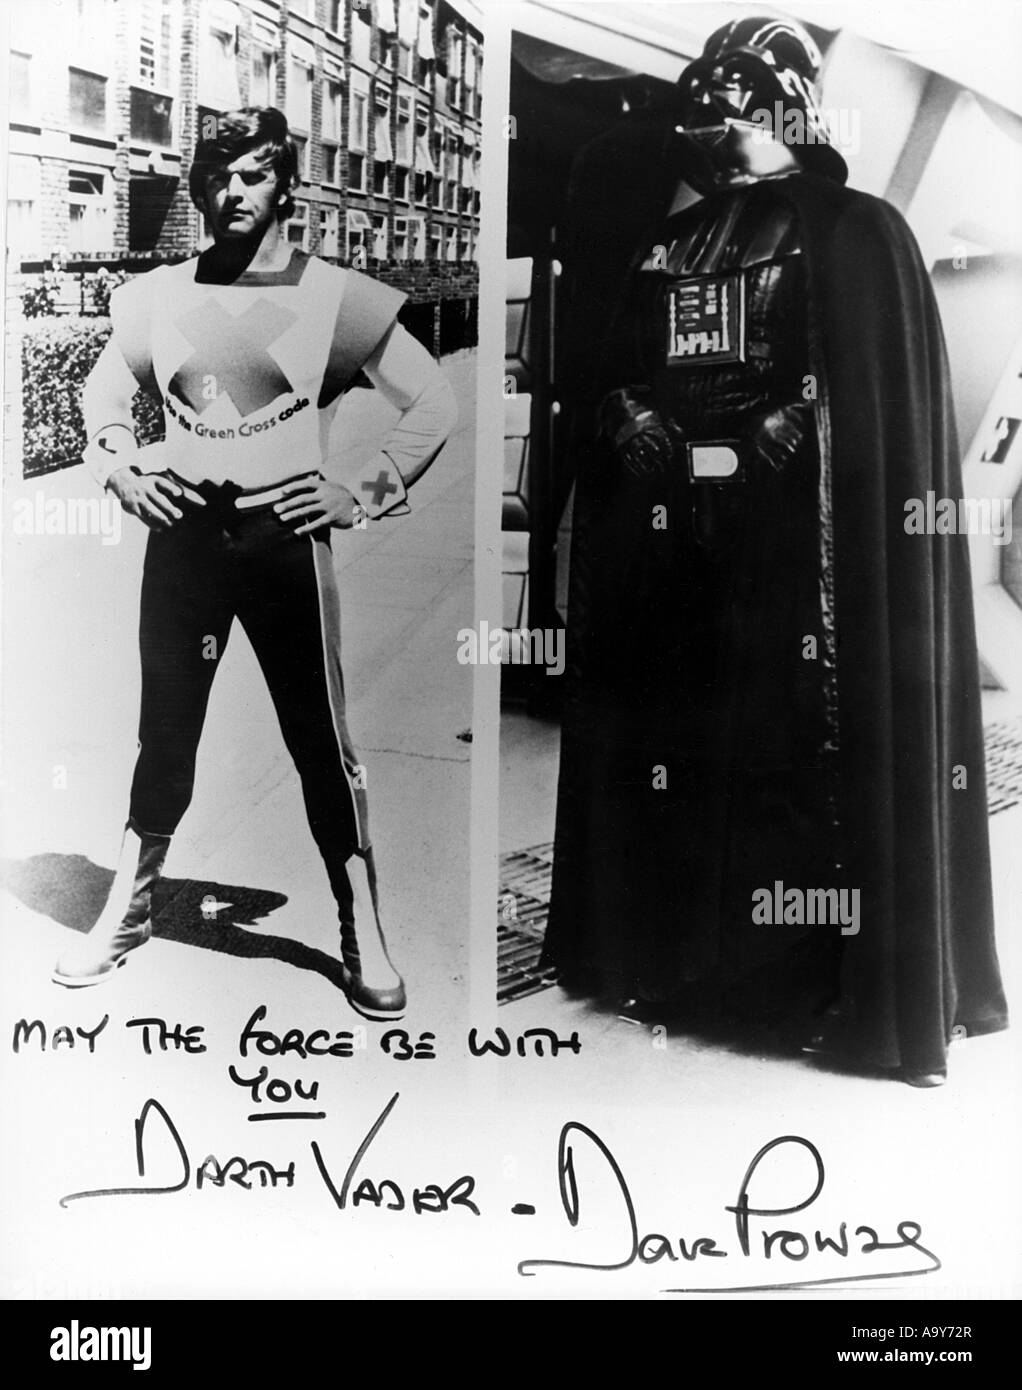 STAR WARS signed photo of  David Prowse showing him in his classic role of Darth Vader Stock Photo